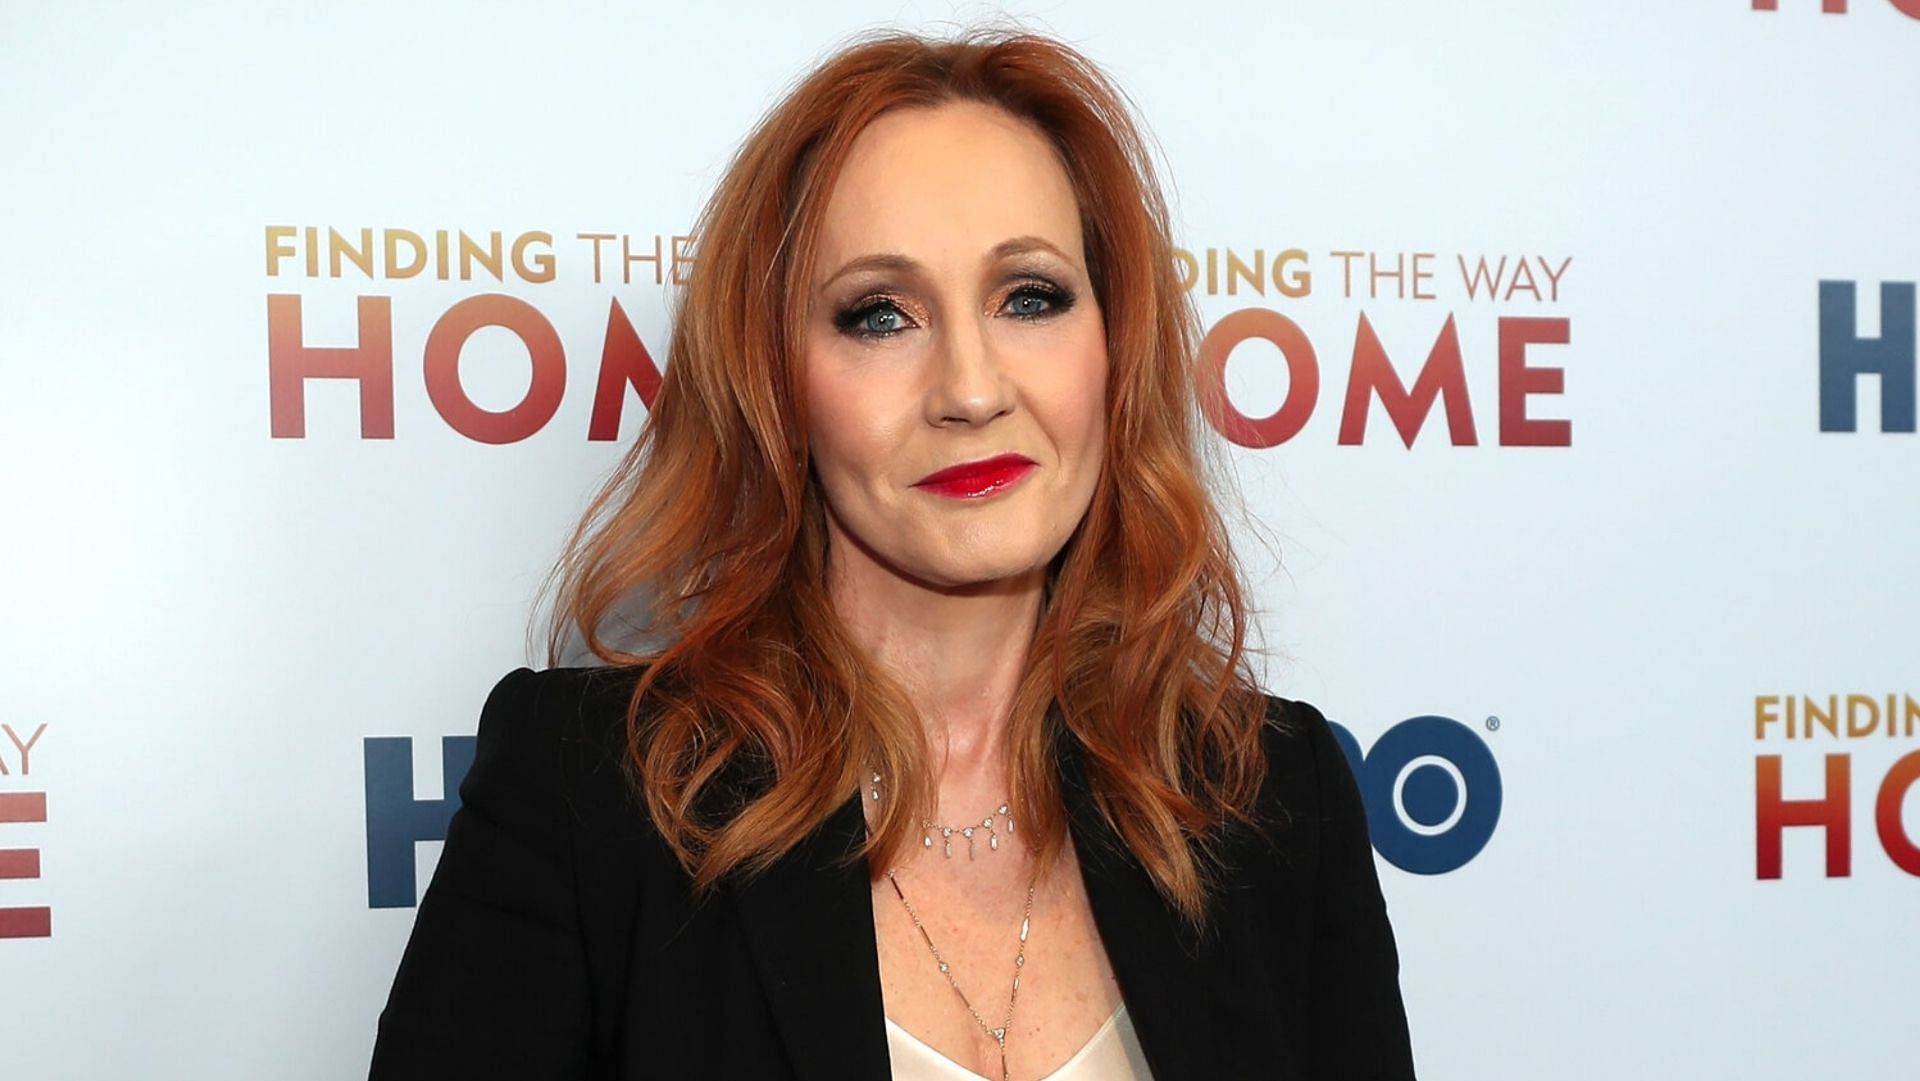 JK Rowling was criticized online for the plot of a character of her newly released book. (Photo by Anadolu Agency/Getty Images)